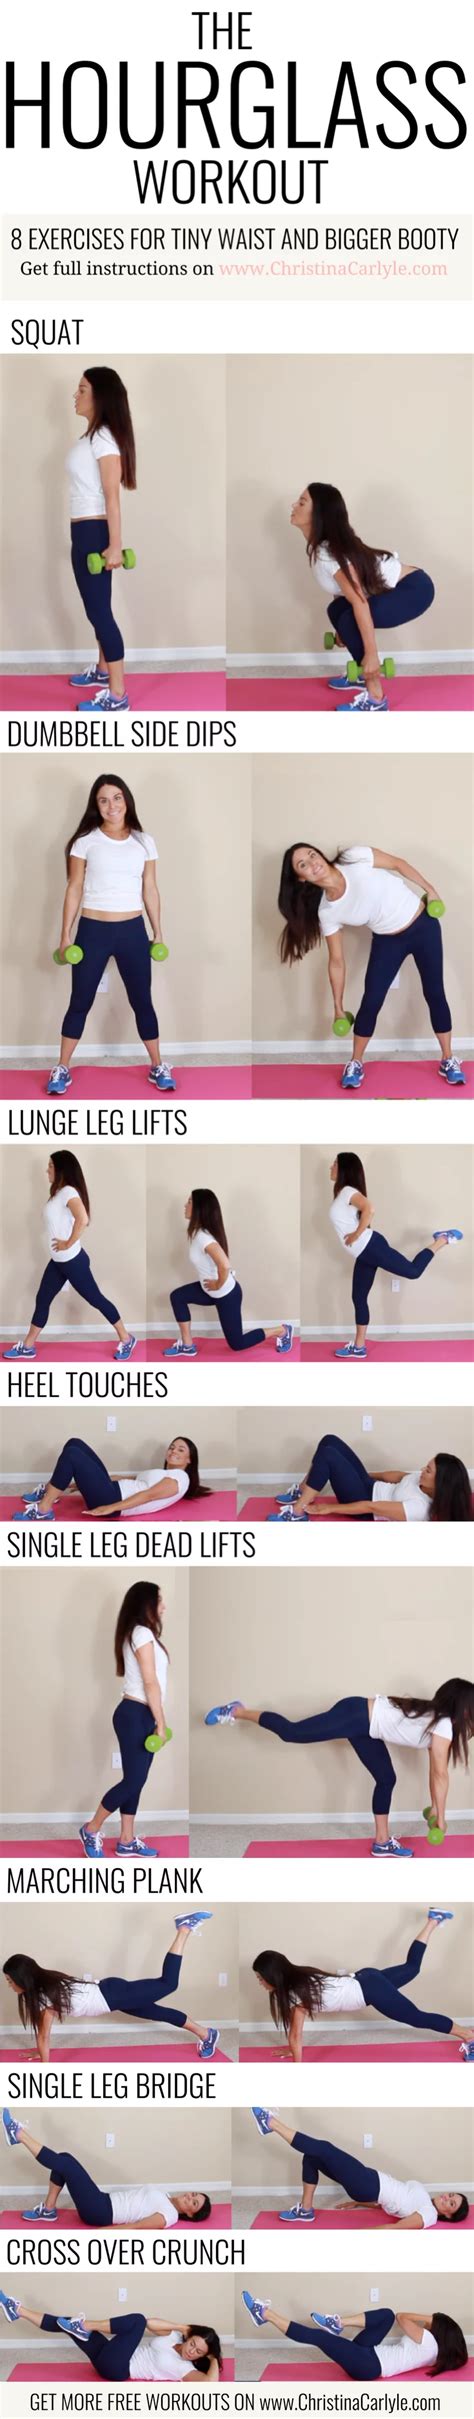 hourglass workout